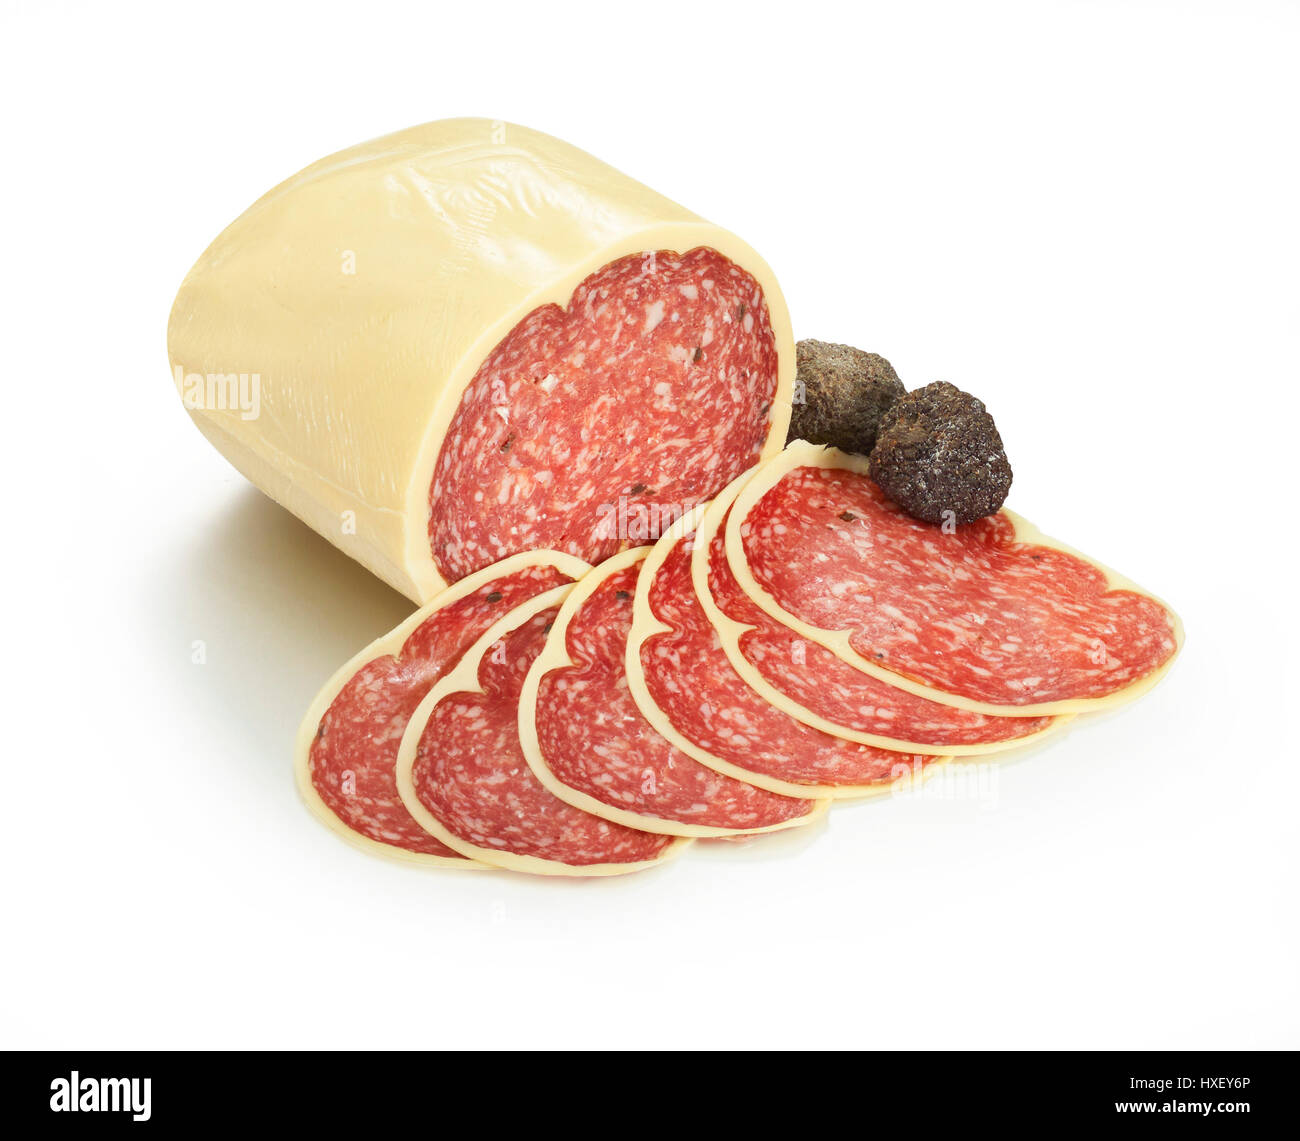 Truffle Salami, partly sliced, with black truffle (Tuberaceae) as decoration Stock Photo